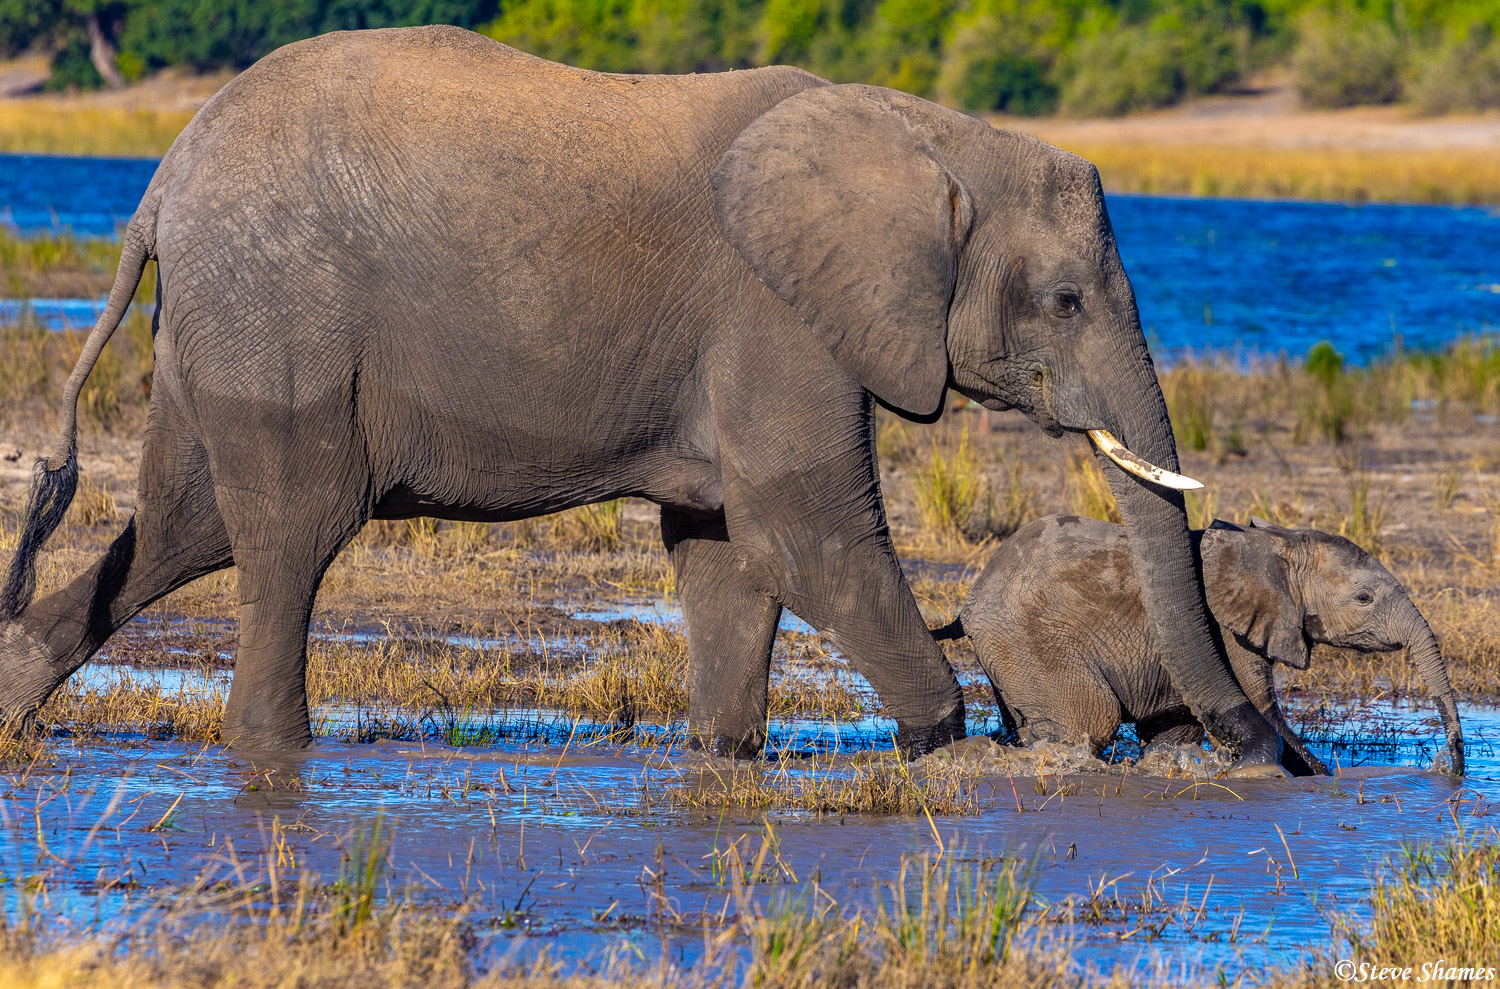 A mother elephant and her youngster navigating the shallows of the Chobe River.